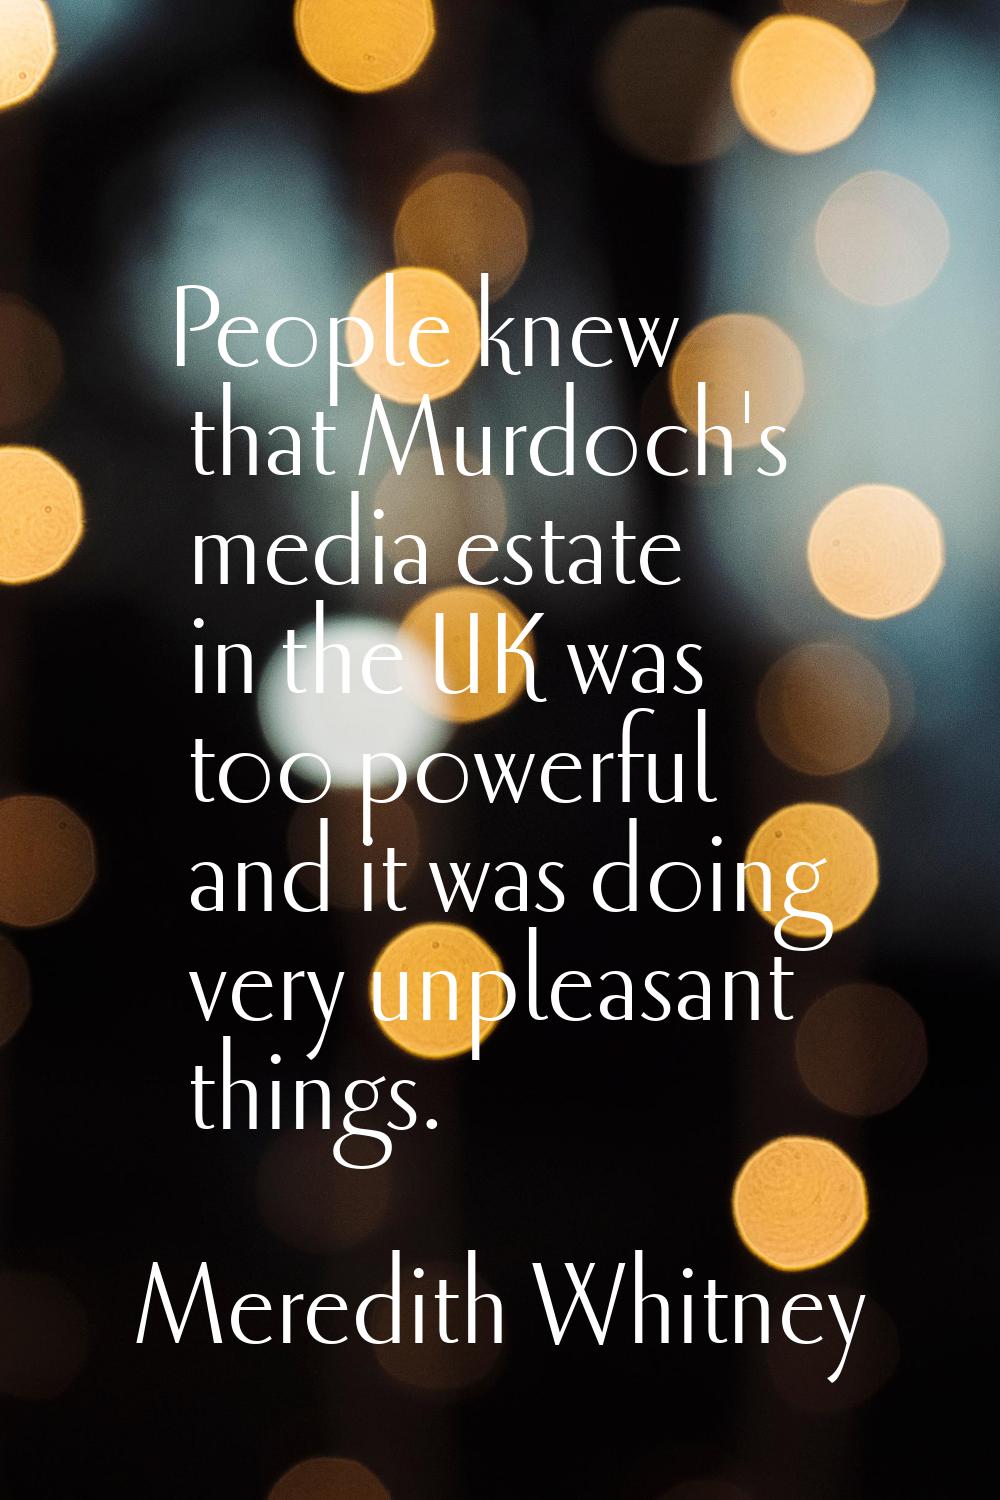 People knew that Murdoch's media estate in the UK was too powerful and it was doing very unpleasant